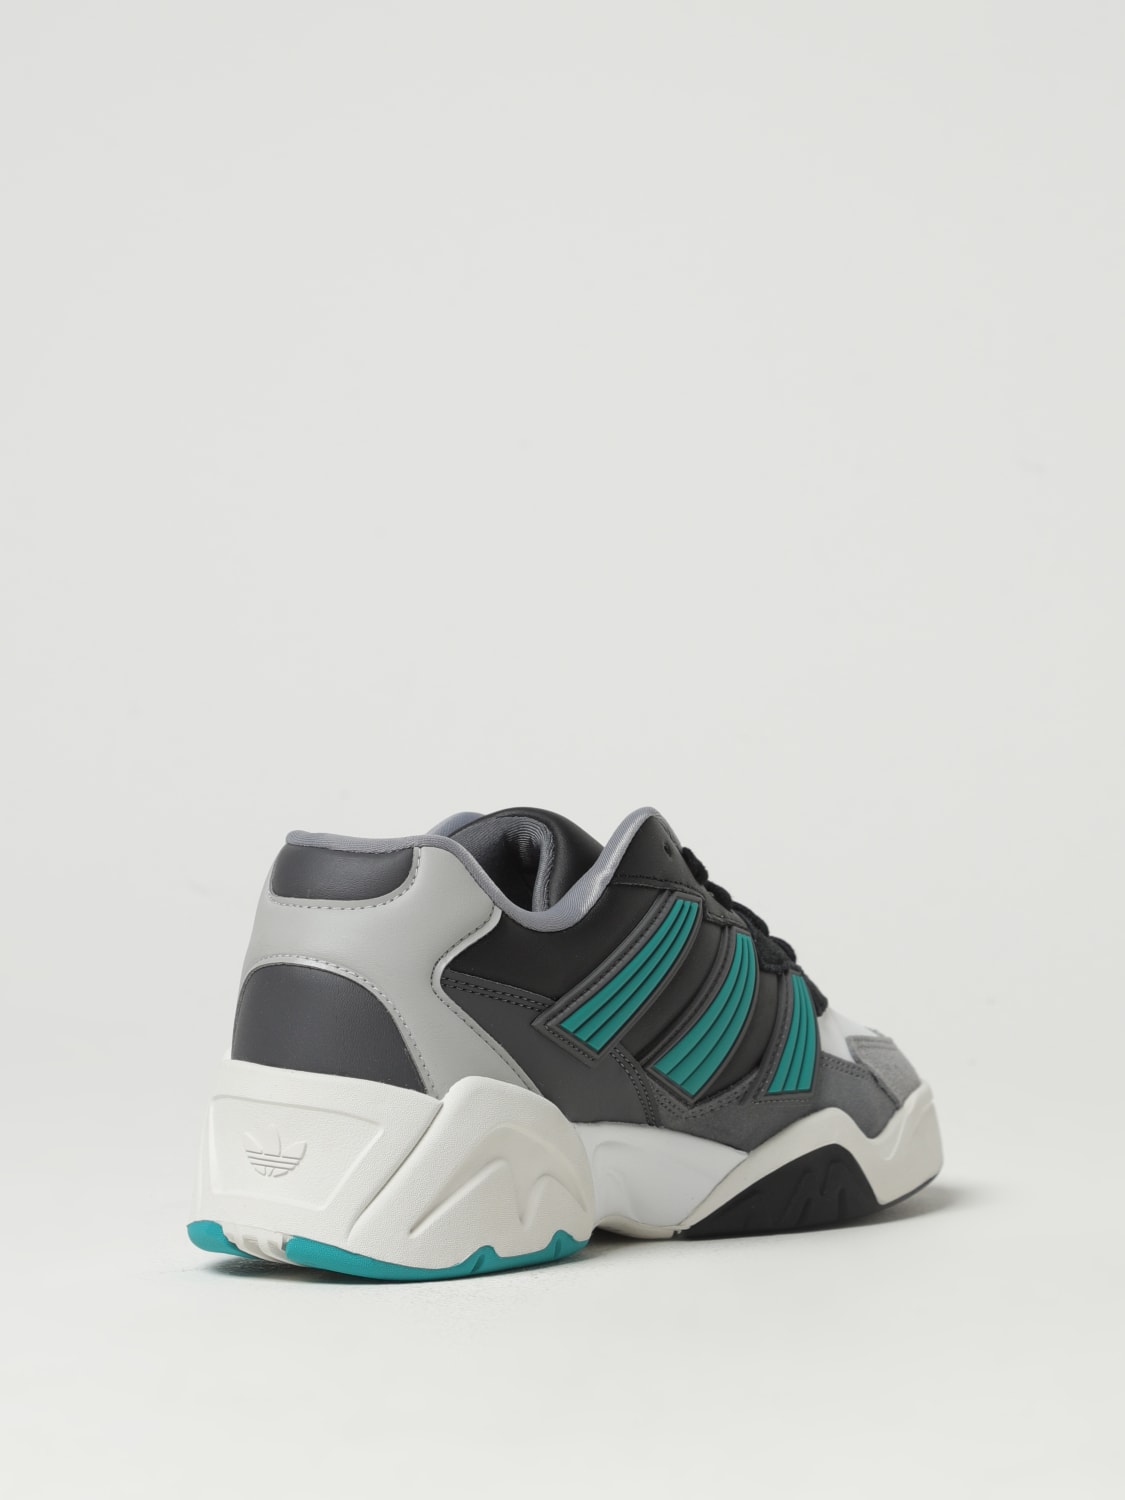 ADIDAS ORIGINALS: Court Magnetic sneakers in leather and rubber - Grey | Adidas  Originals sneakers IF5378 online at